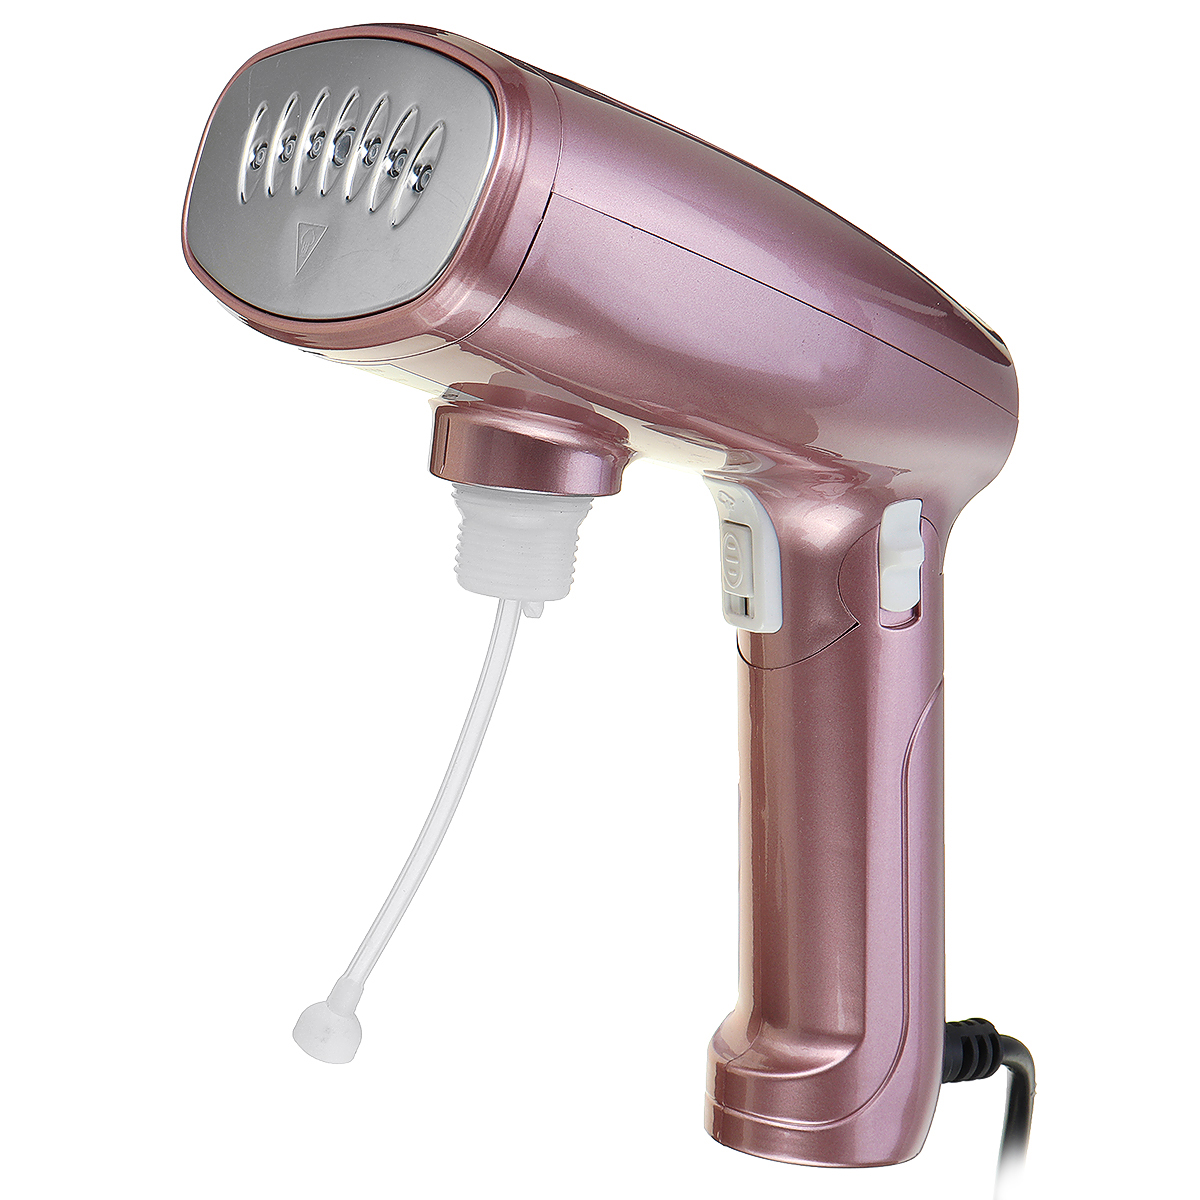 Portable-Garment-Steamer-1500W-Powerful-Clothes-Steam-Iron-Fast-Heat-up-Fabric-Wrinkle-Removal-320ml-1769367-8